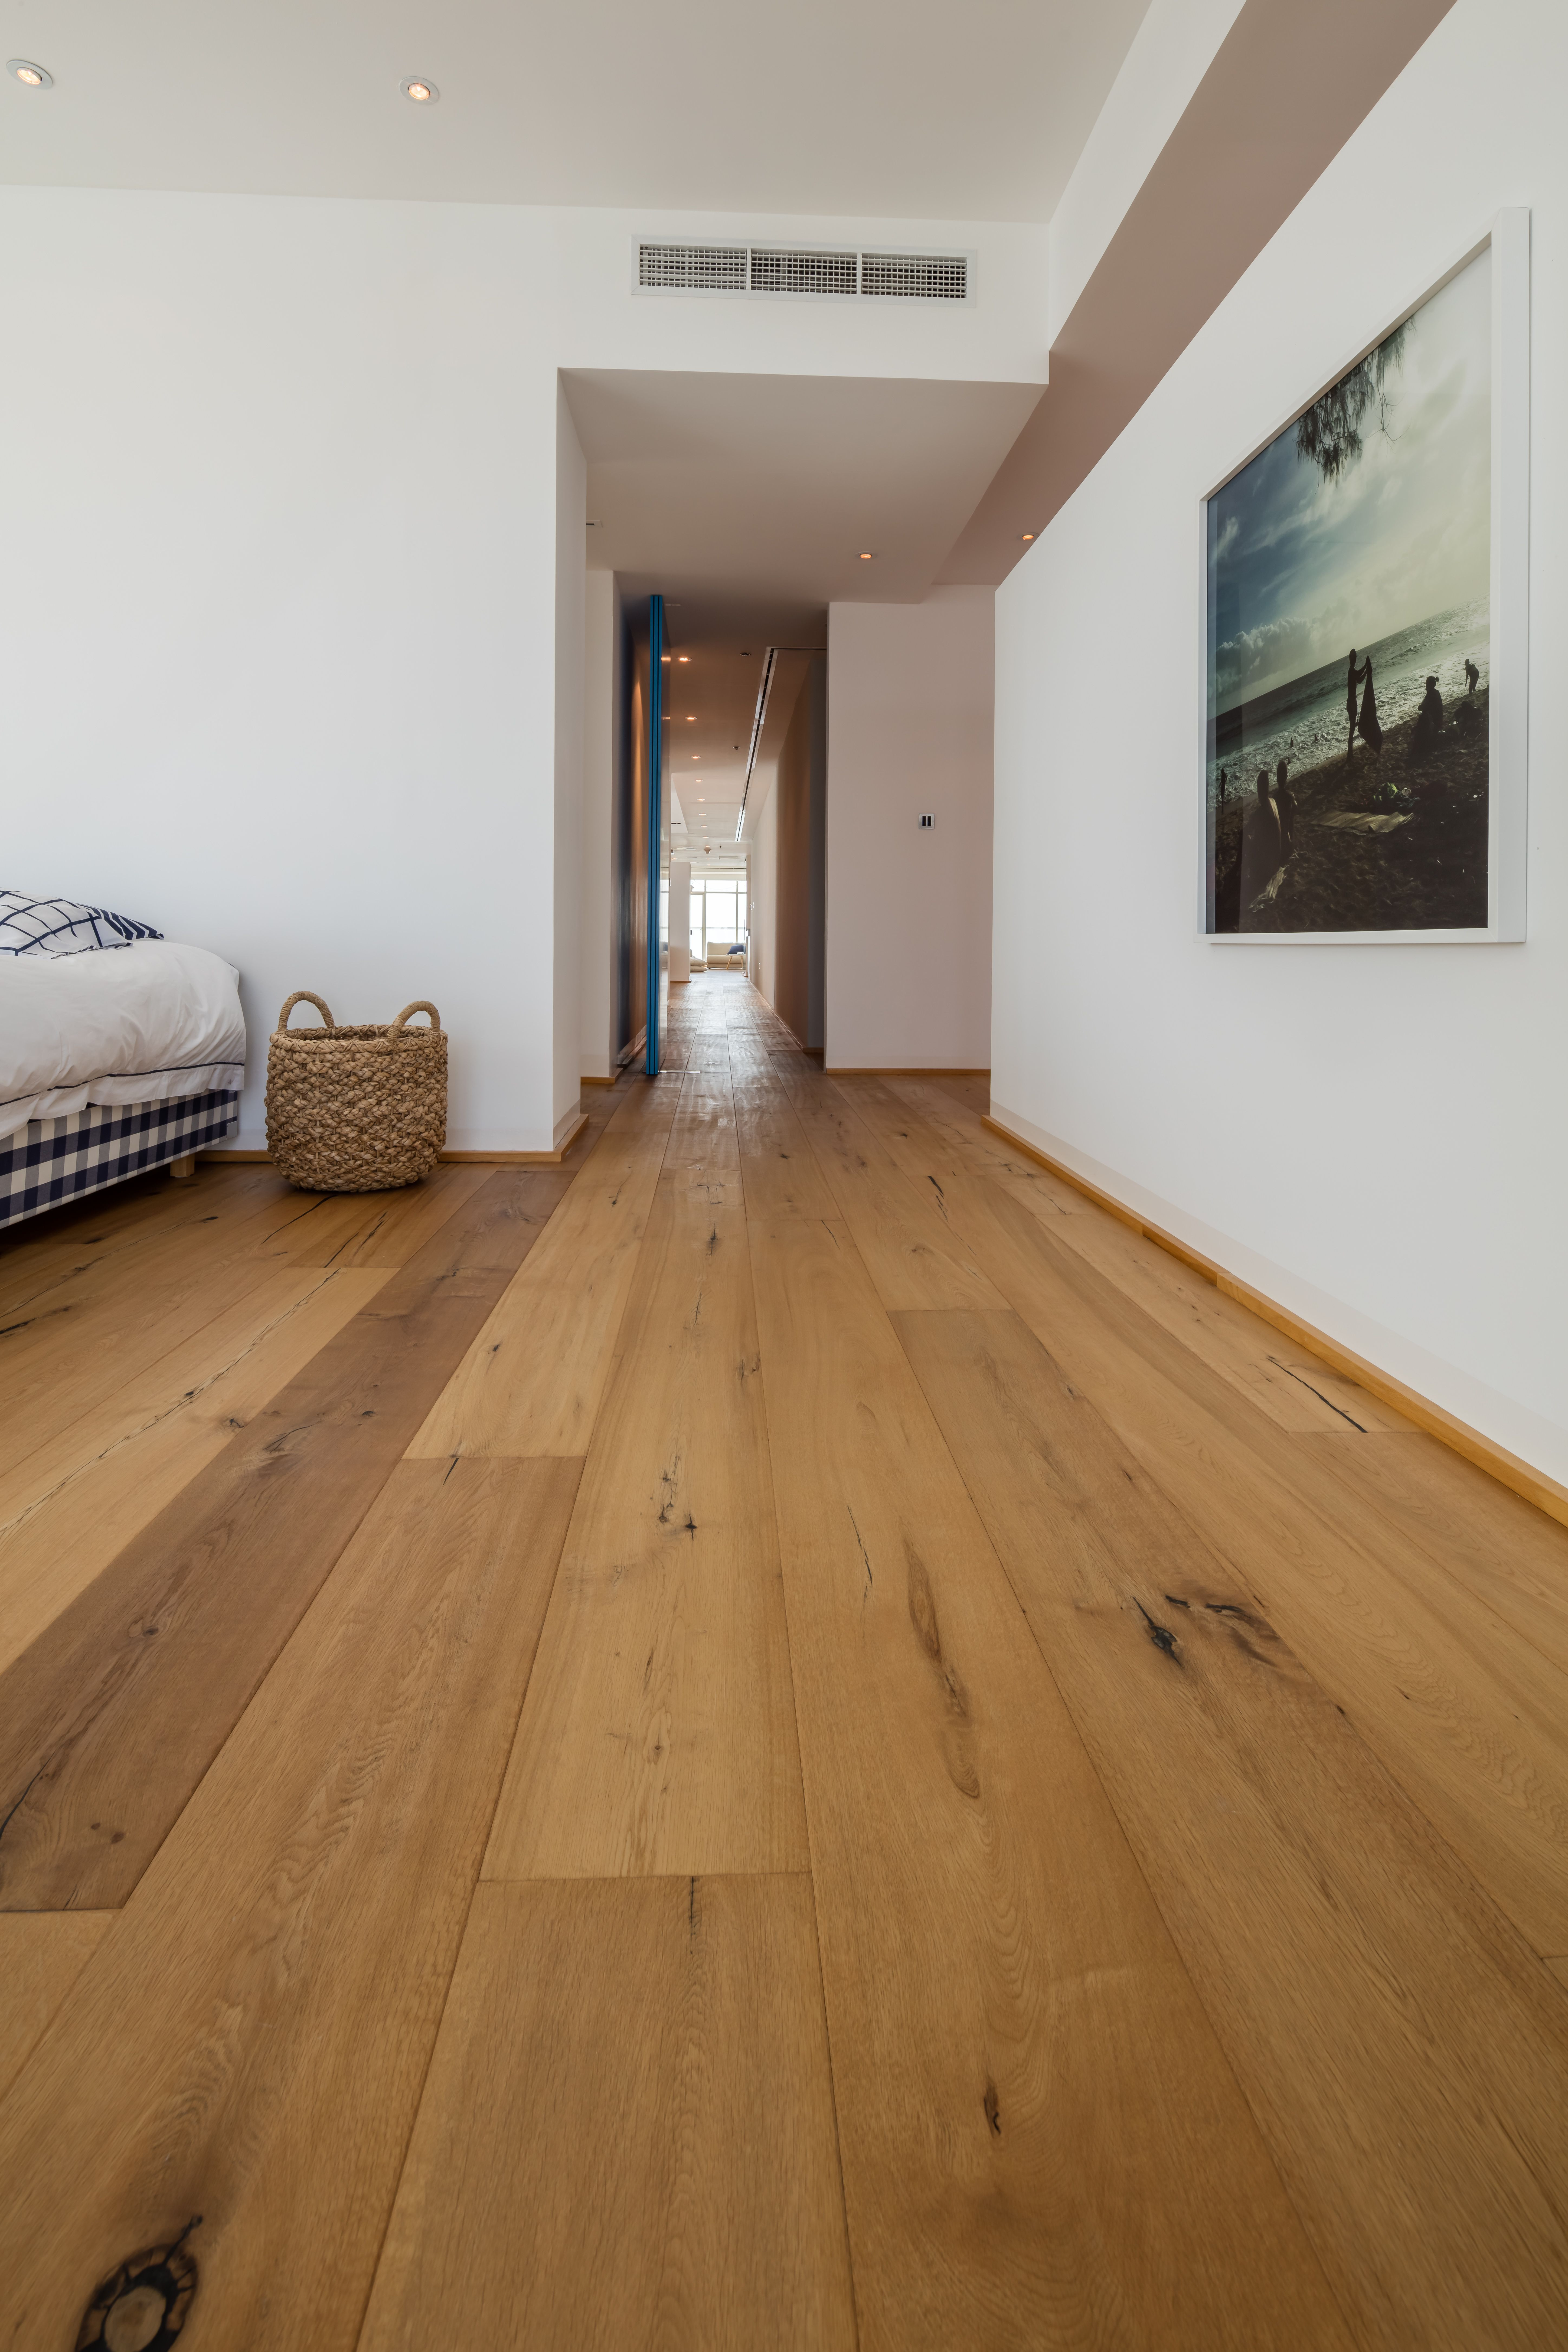 14 Unique Oak Hardwood Flooring with Pegs 2024 free download oak hardwood flooring with pegs of hallway goals ac29cc2a8 our clients penthouse in emirates crown dubai throughout hallway goals ac29cc2a8 our clients penthouse in emirates crown dubai mari